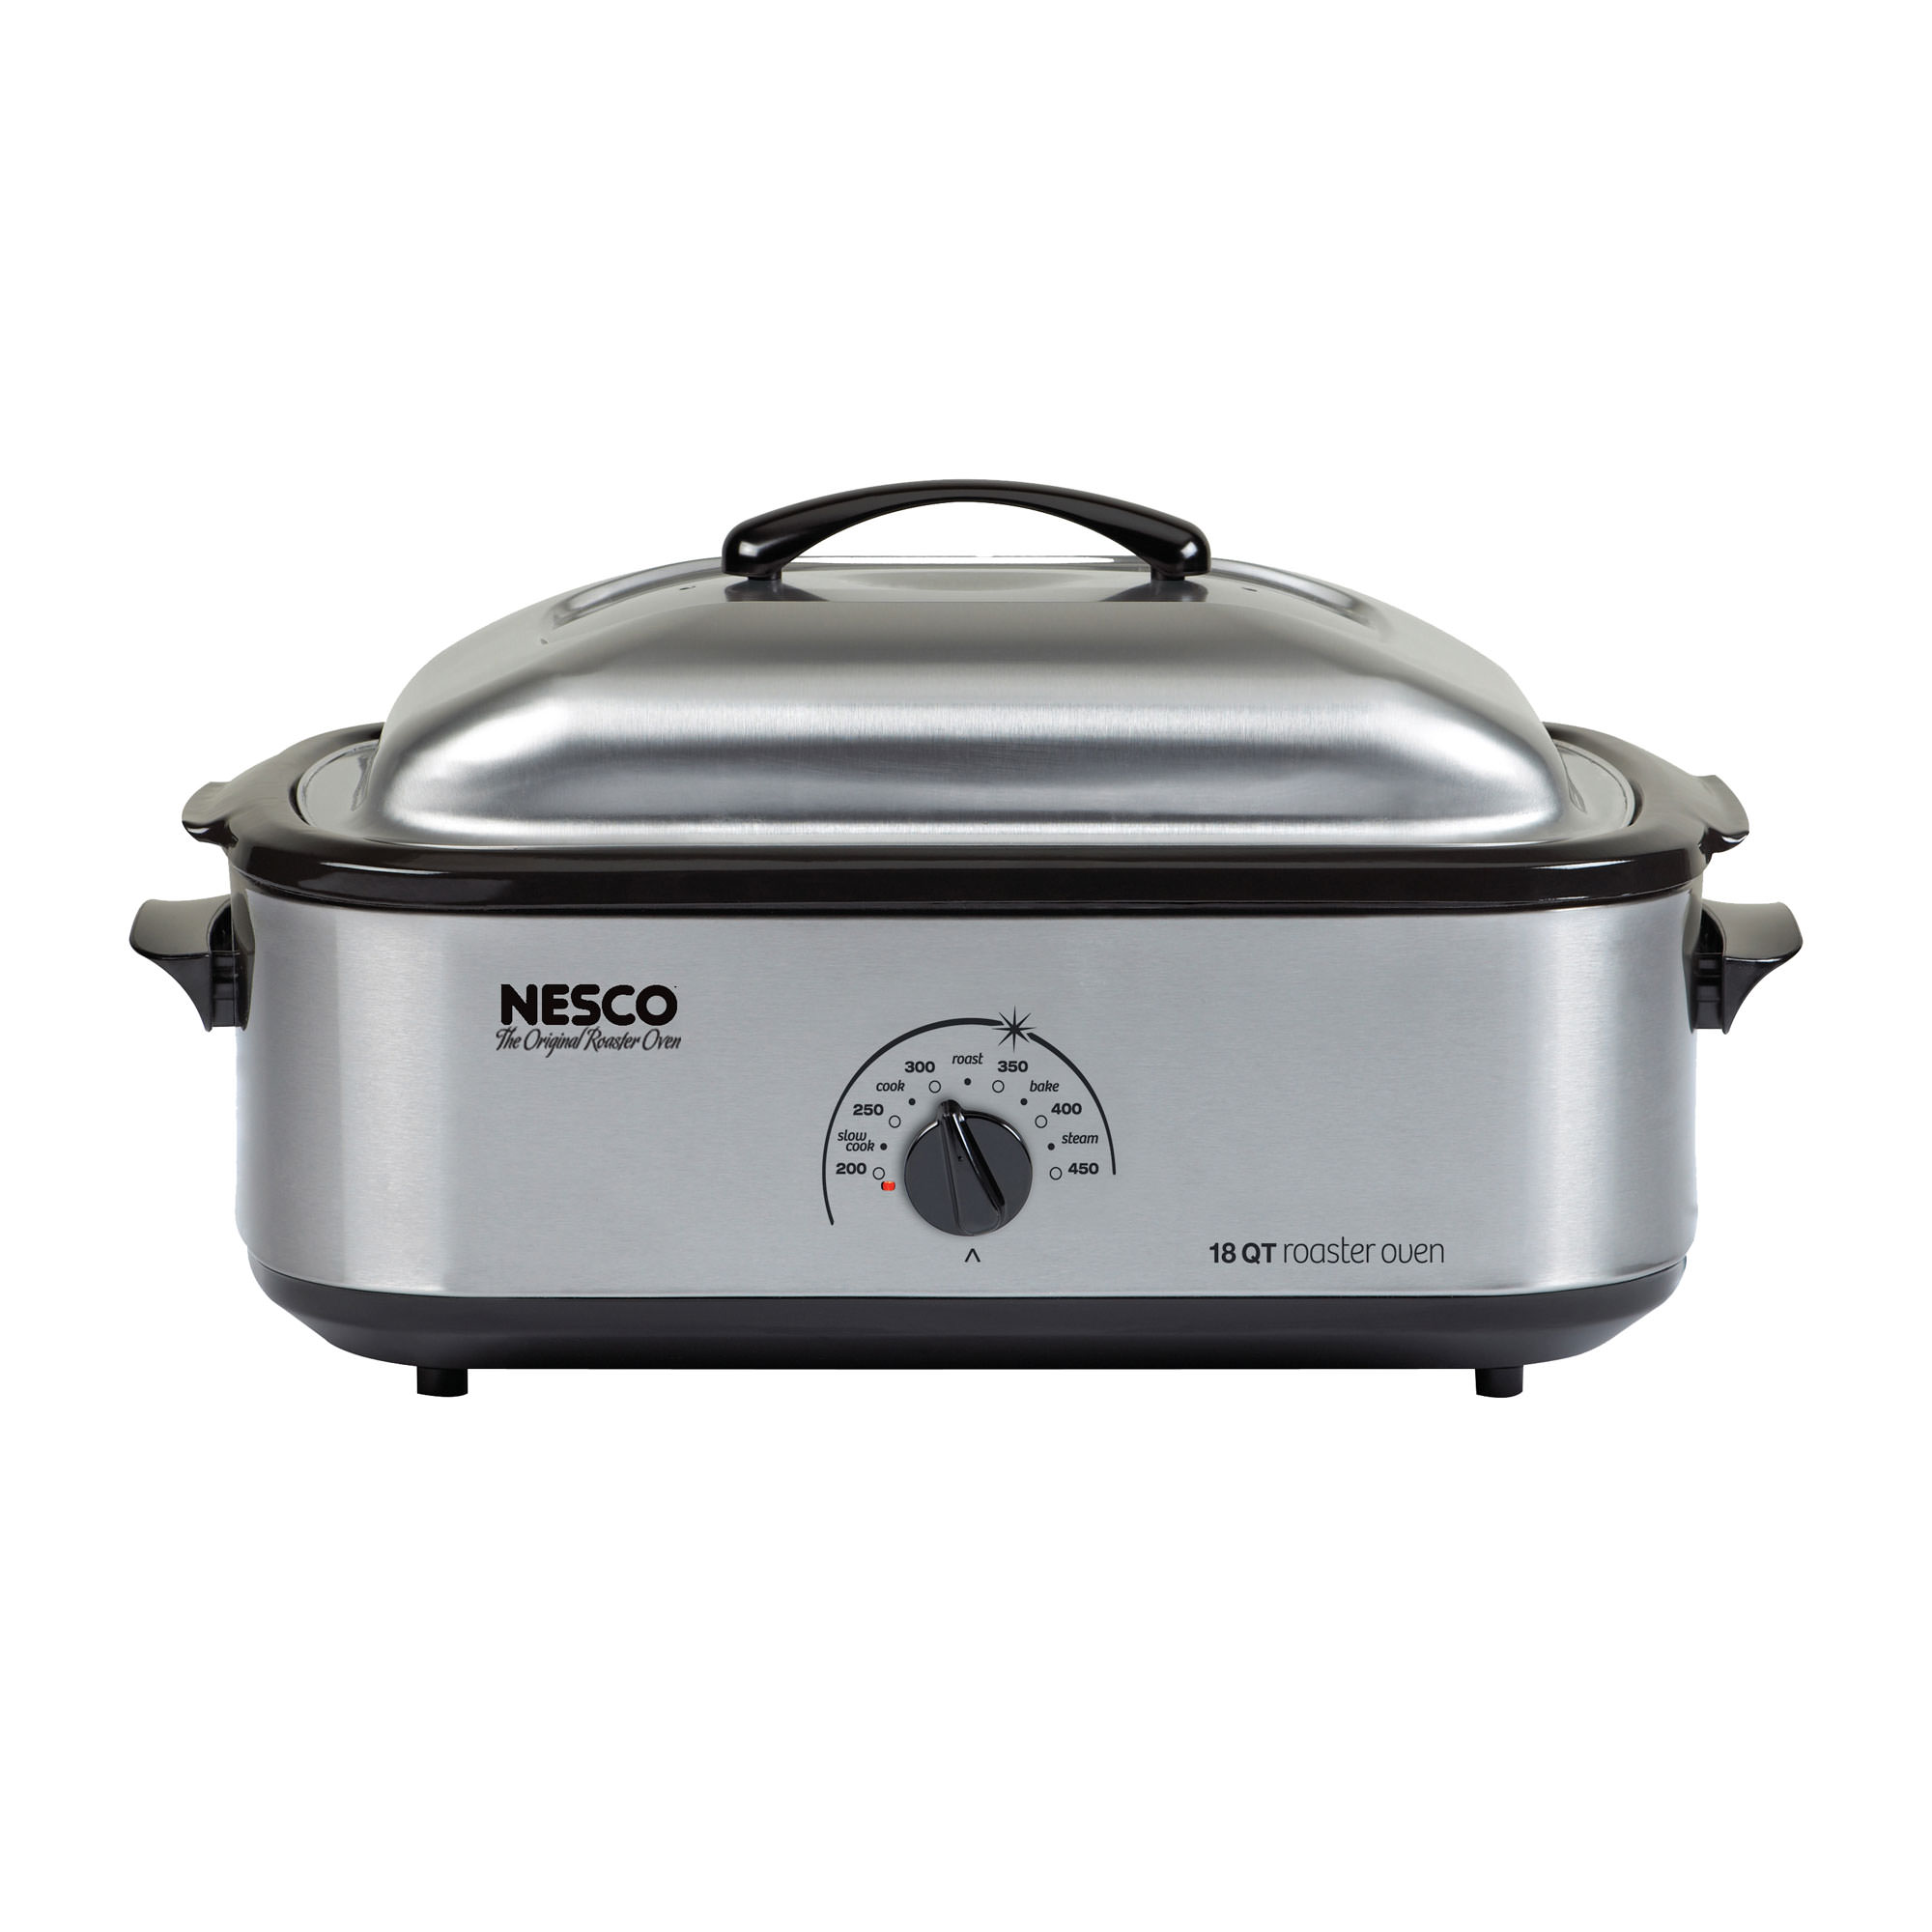 NESCO Professional Roaster Oven, Black and Stainless Steel, 18 Quart - image 1 of 3